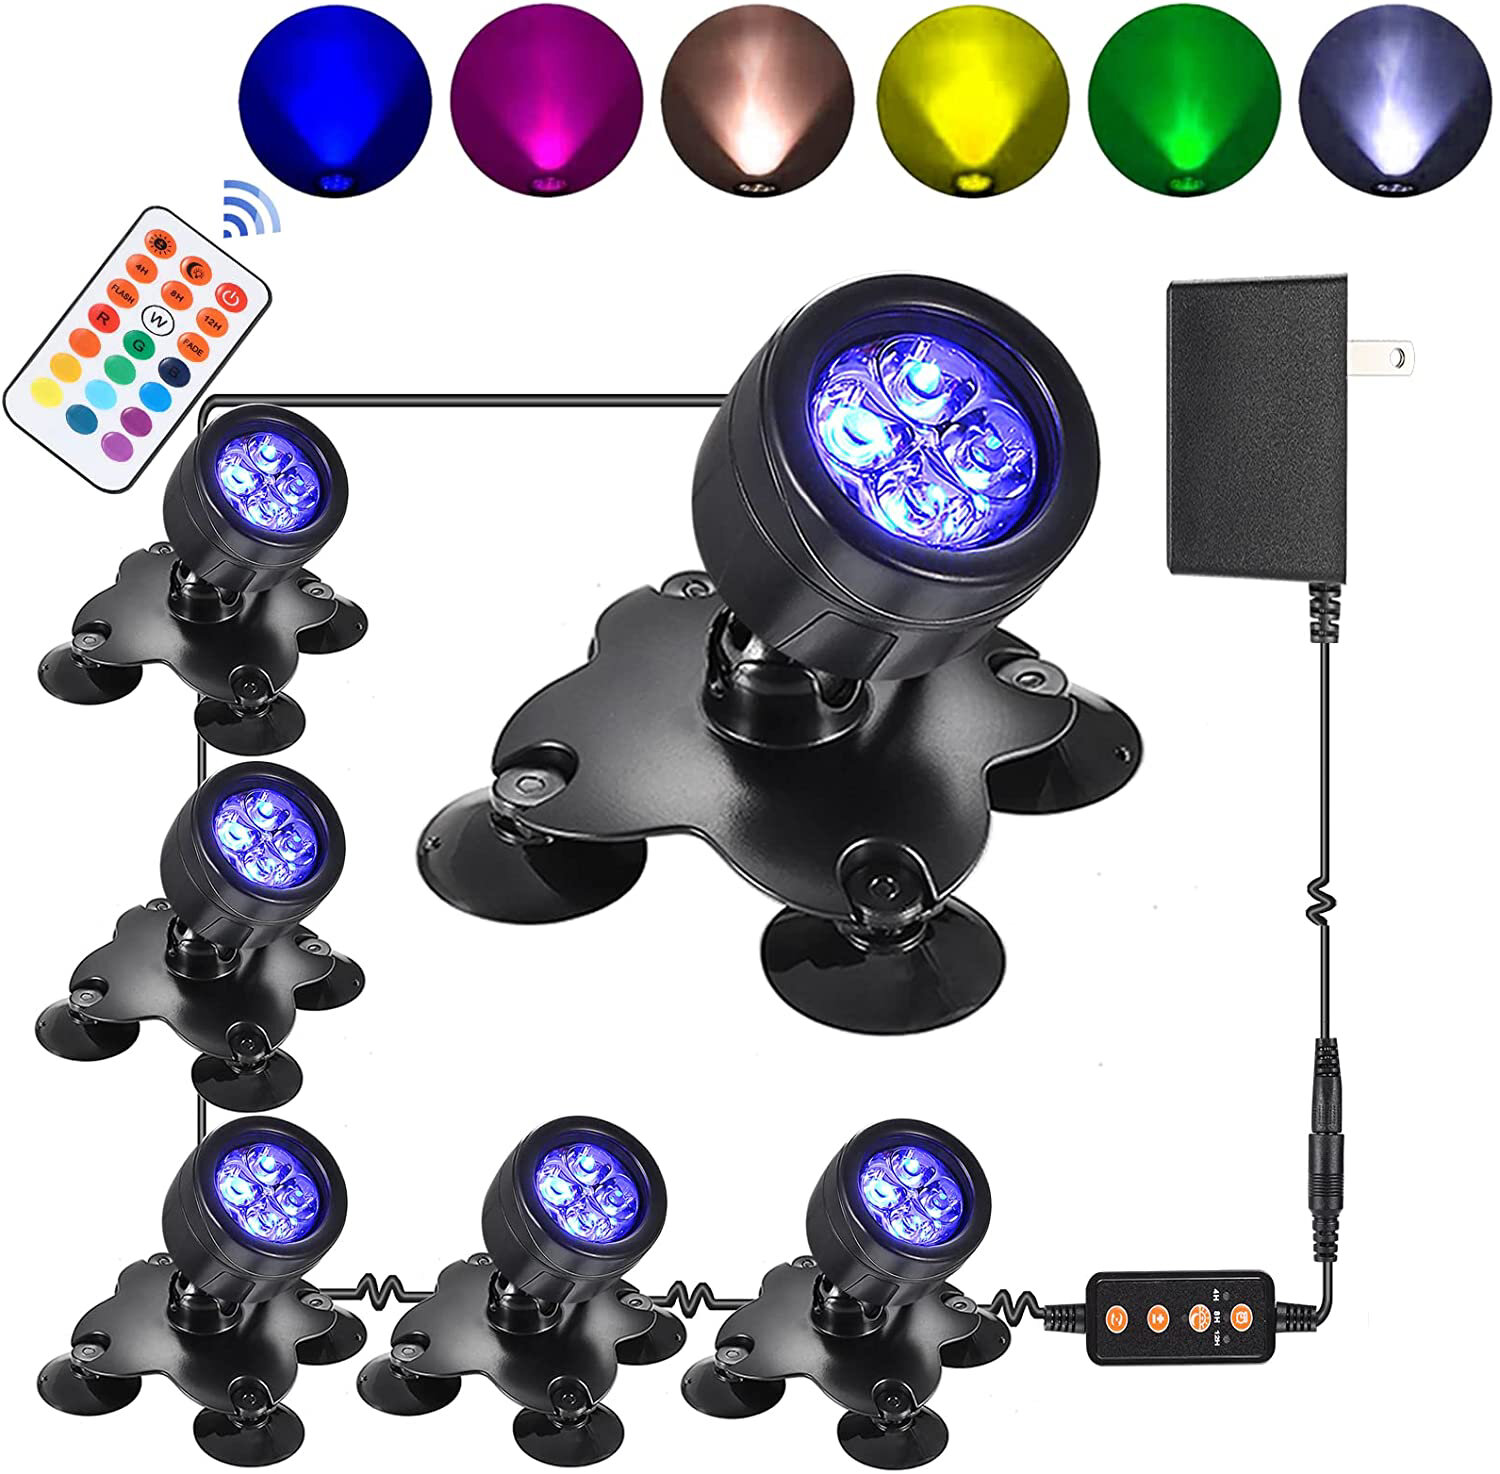 best price,led,pond,lights,underwater,fountain,submersibl,6pcs,discount